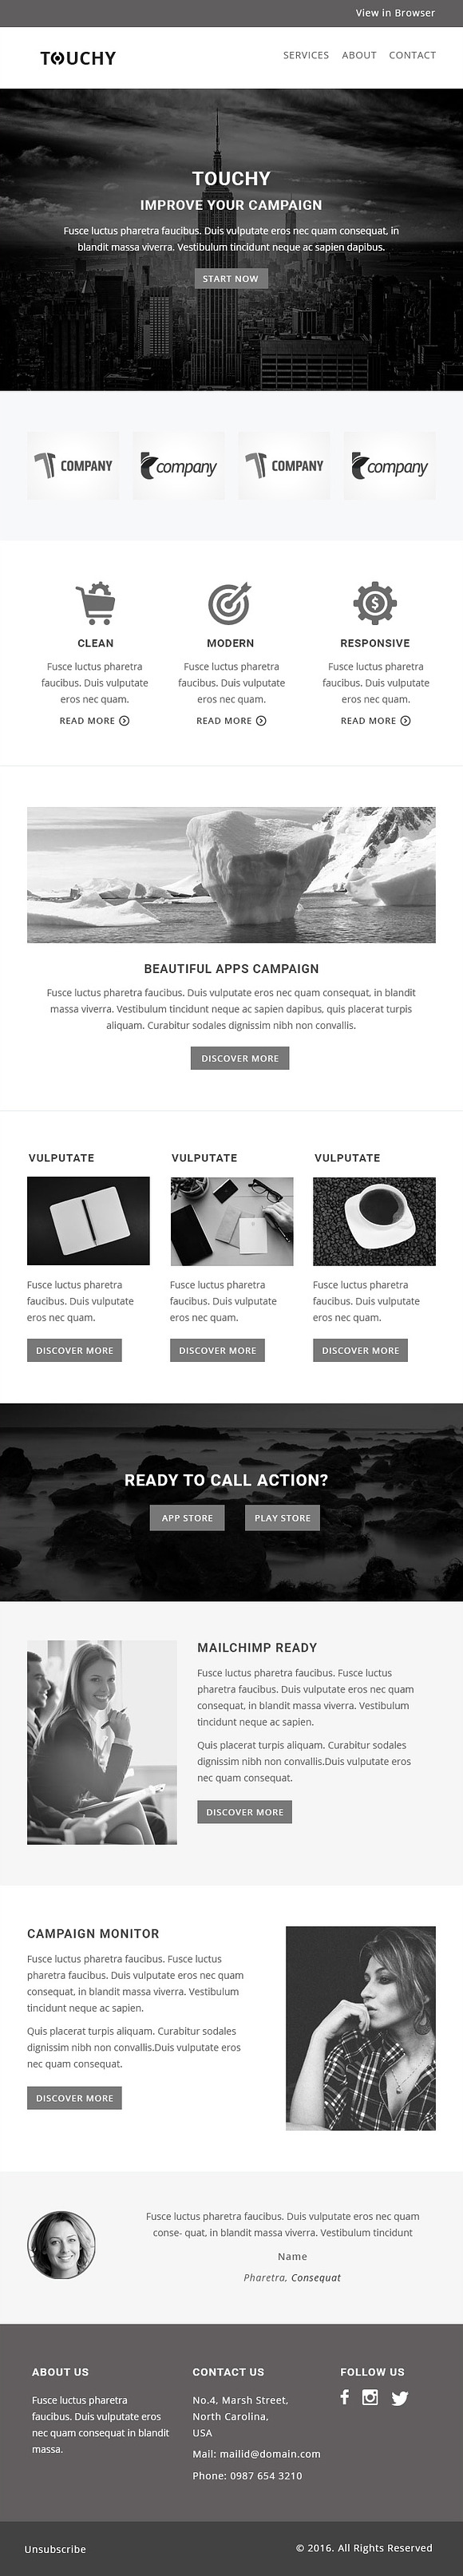 Touchy- RESPONSIVE EMAIL TEMPLATE in Mailchimp Templates - product preview 1